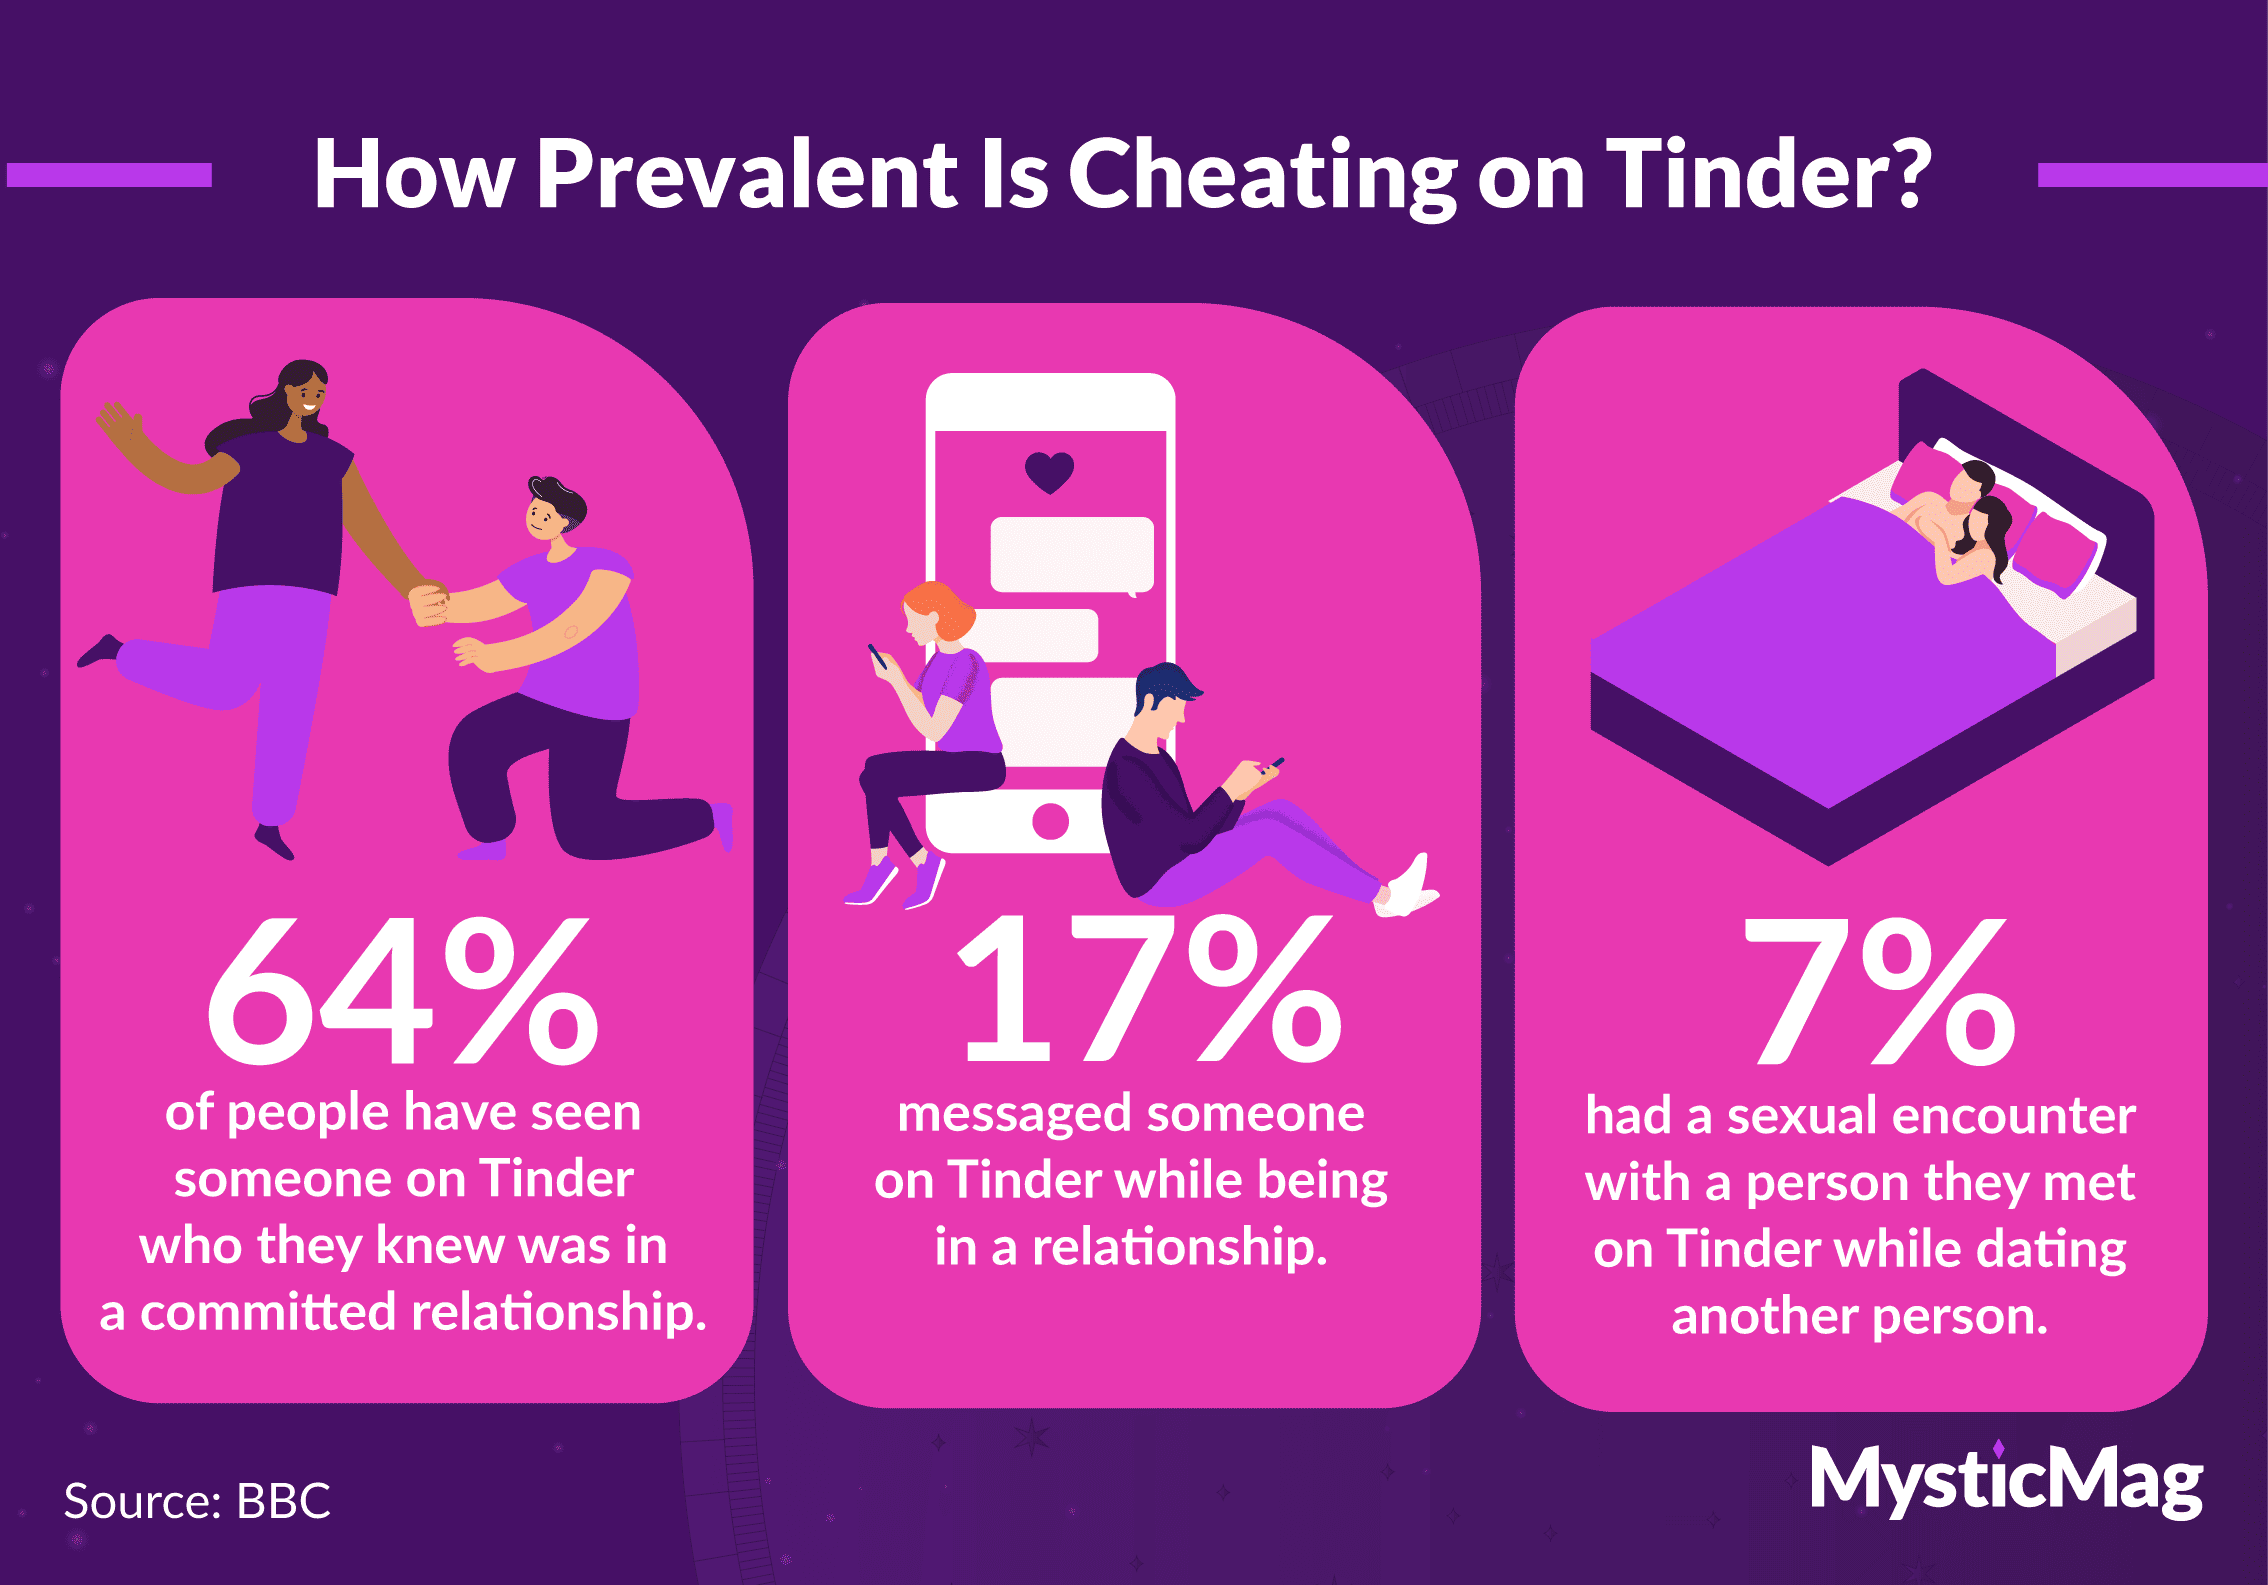 Statistics about cheating on Tinder